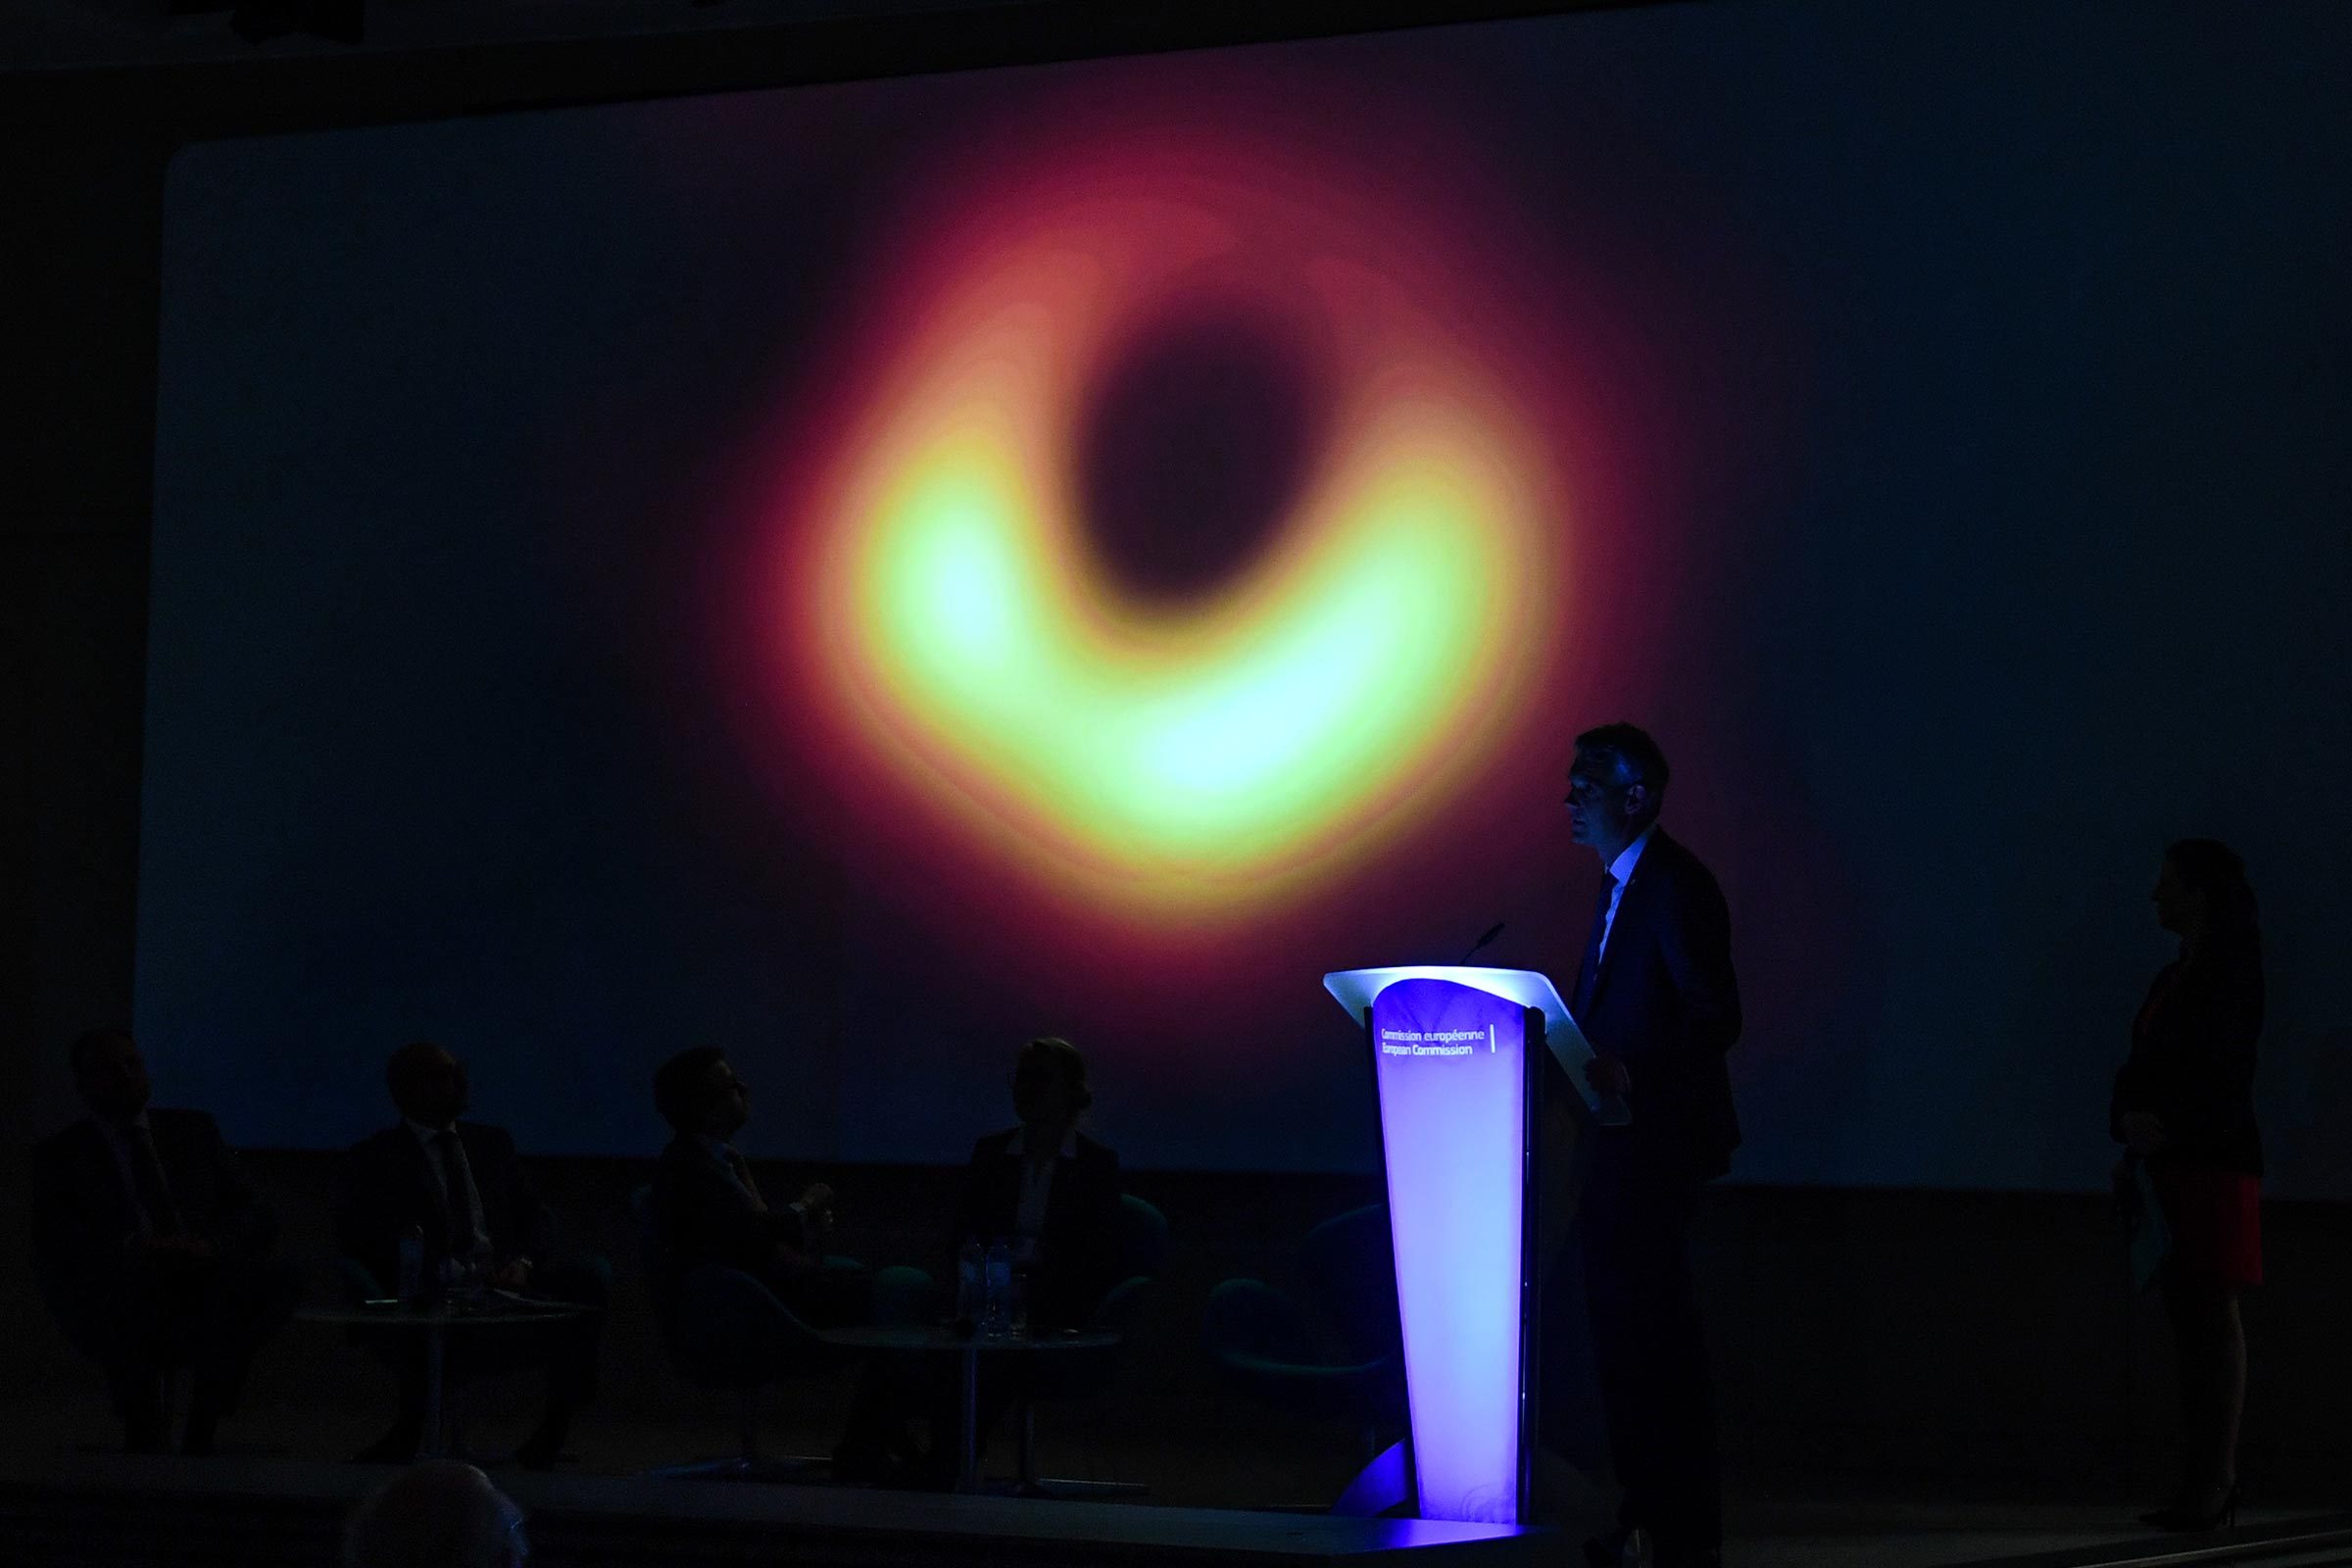 Astronomers capture first image of a Black Hole, press conference, European Commission, Brussels, Belgium